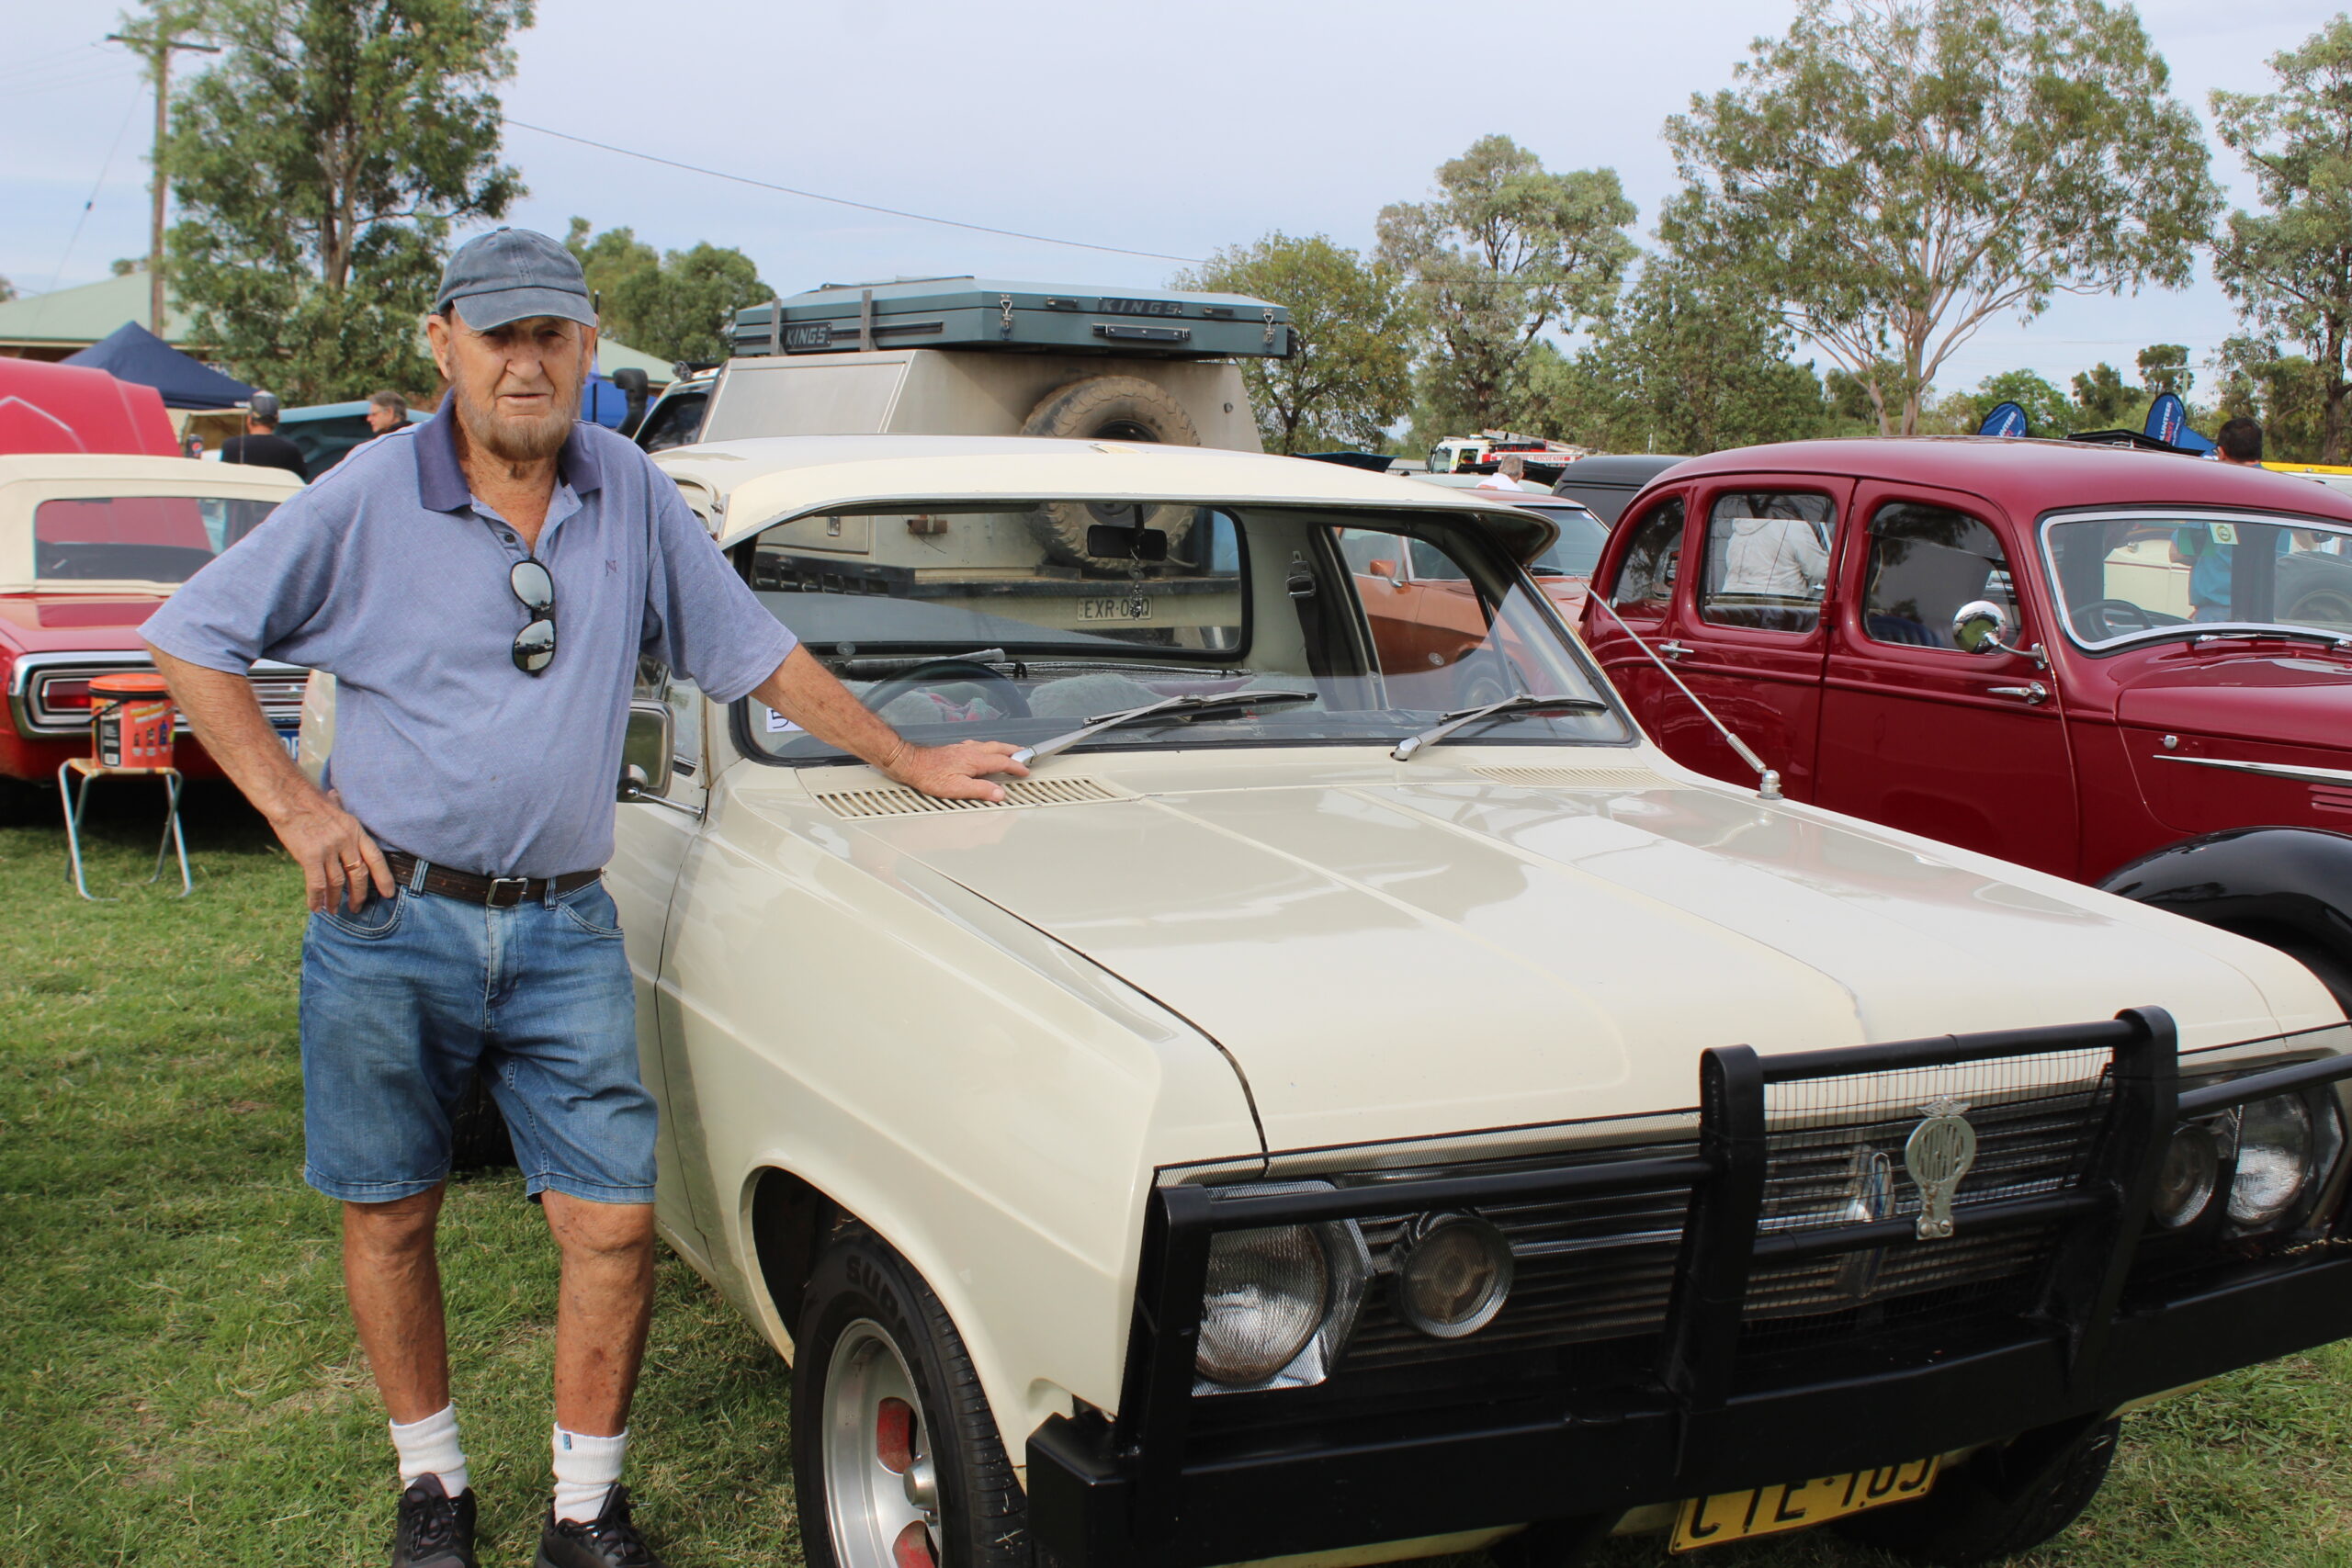 Exhibitors travelled far and wide to Boggabri ‘Show n Shine’ | Gallery